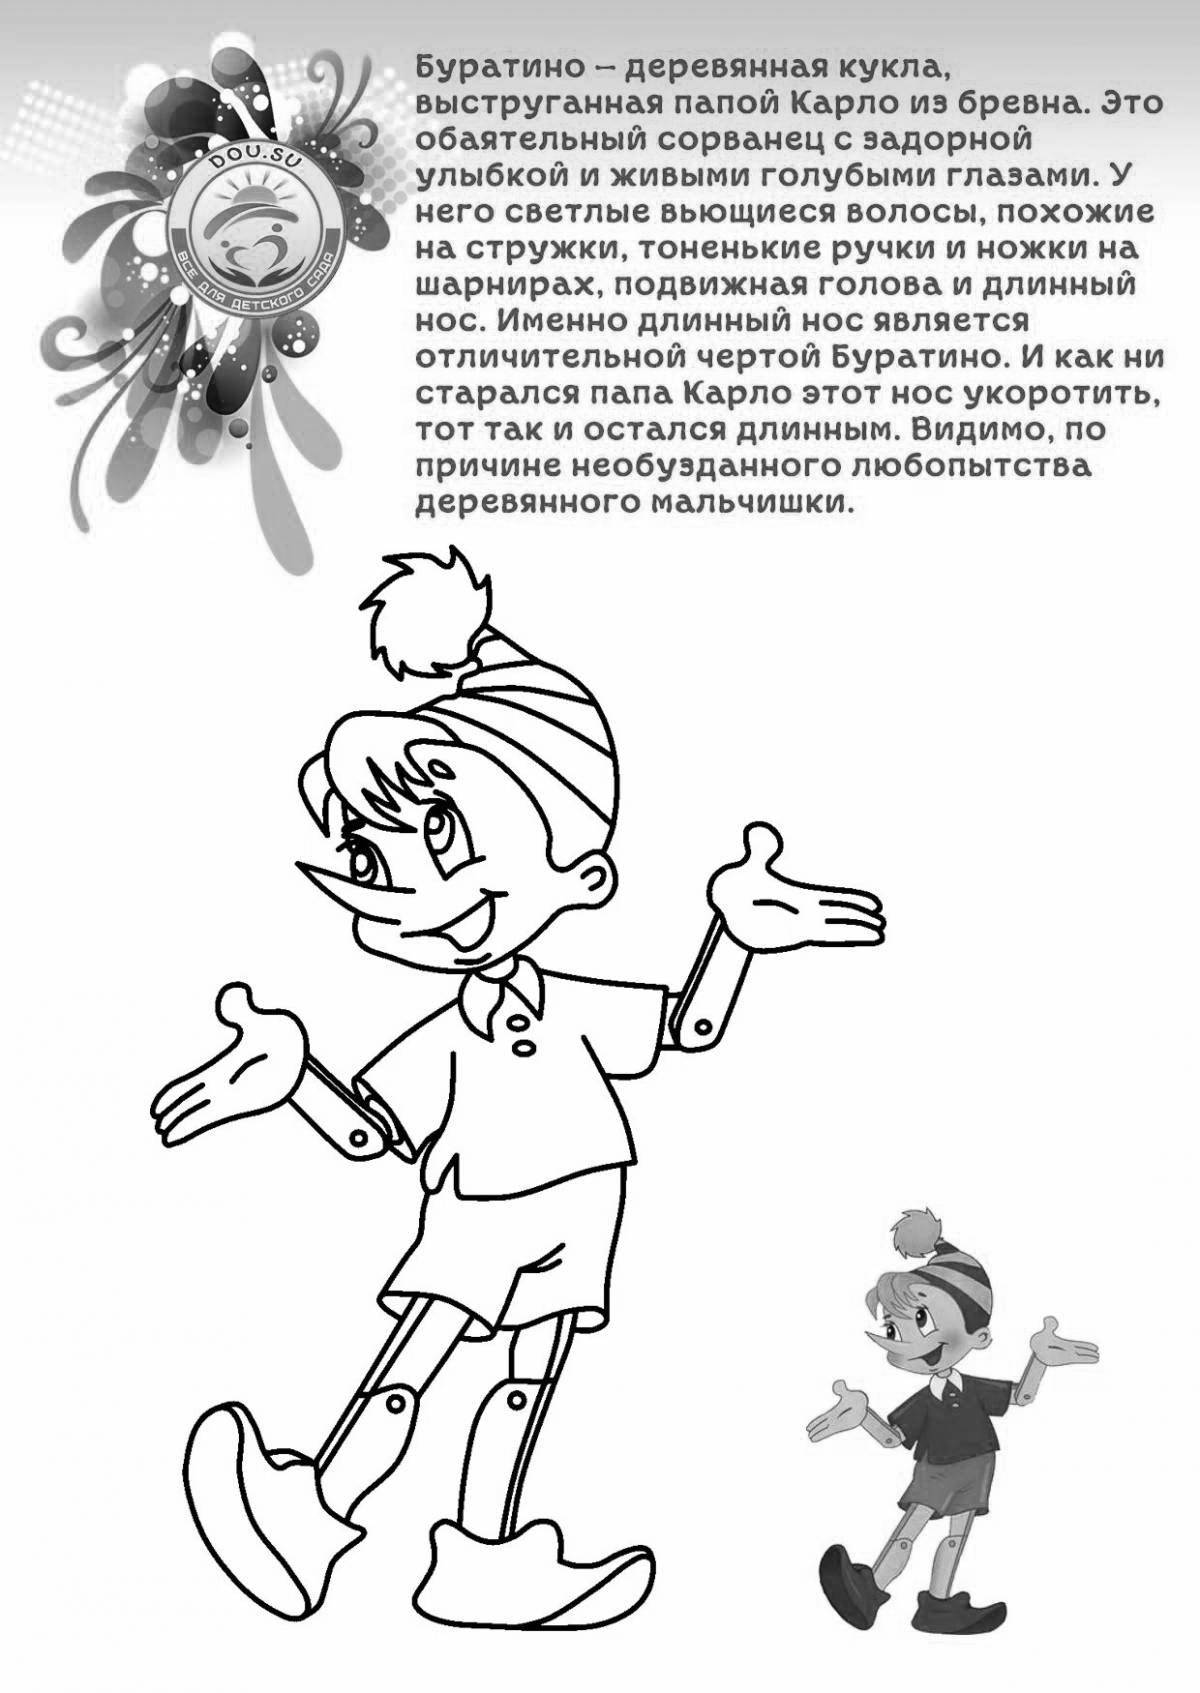 Sharp pinocchio coloring page